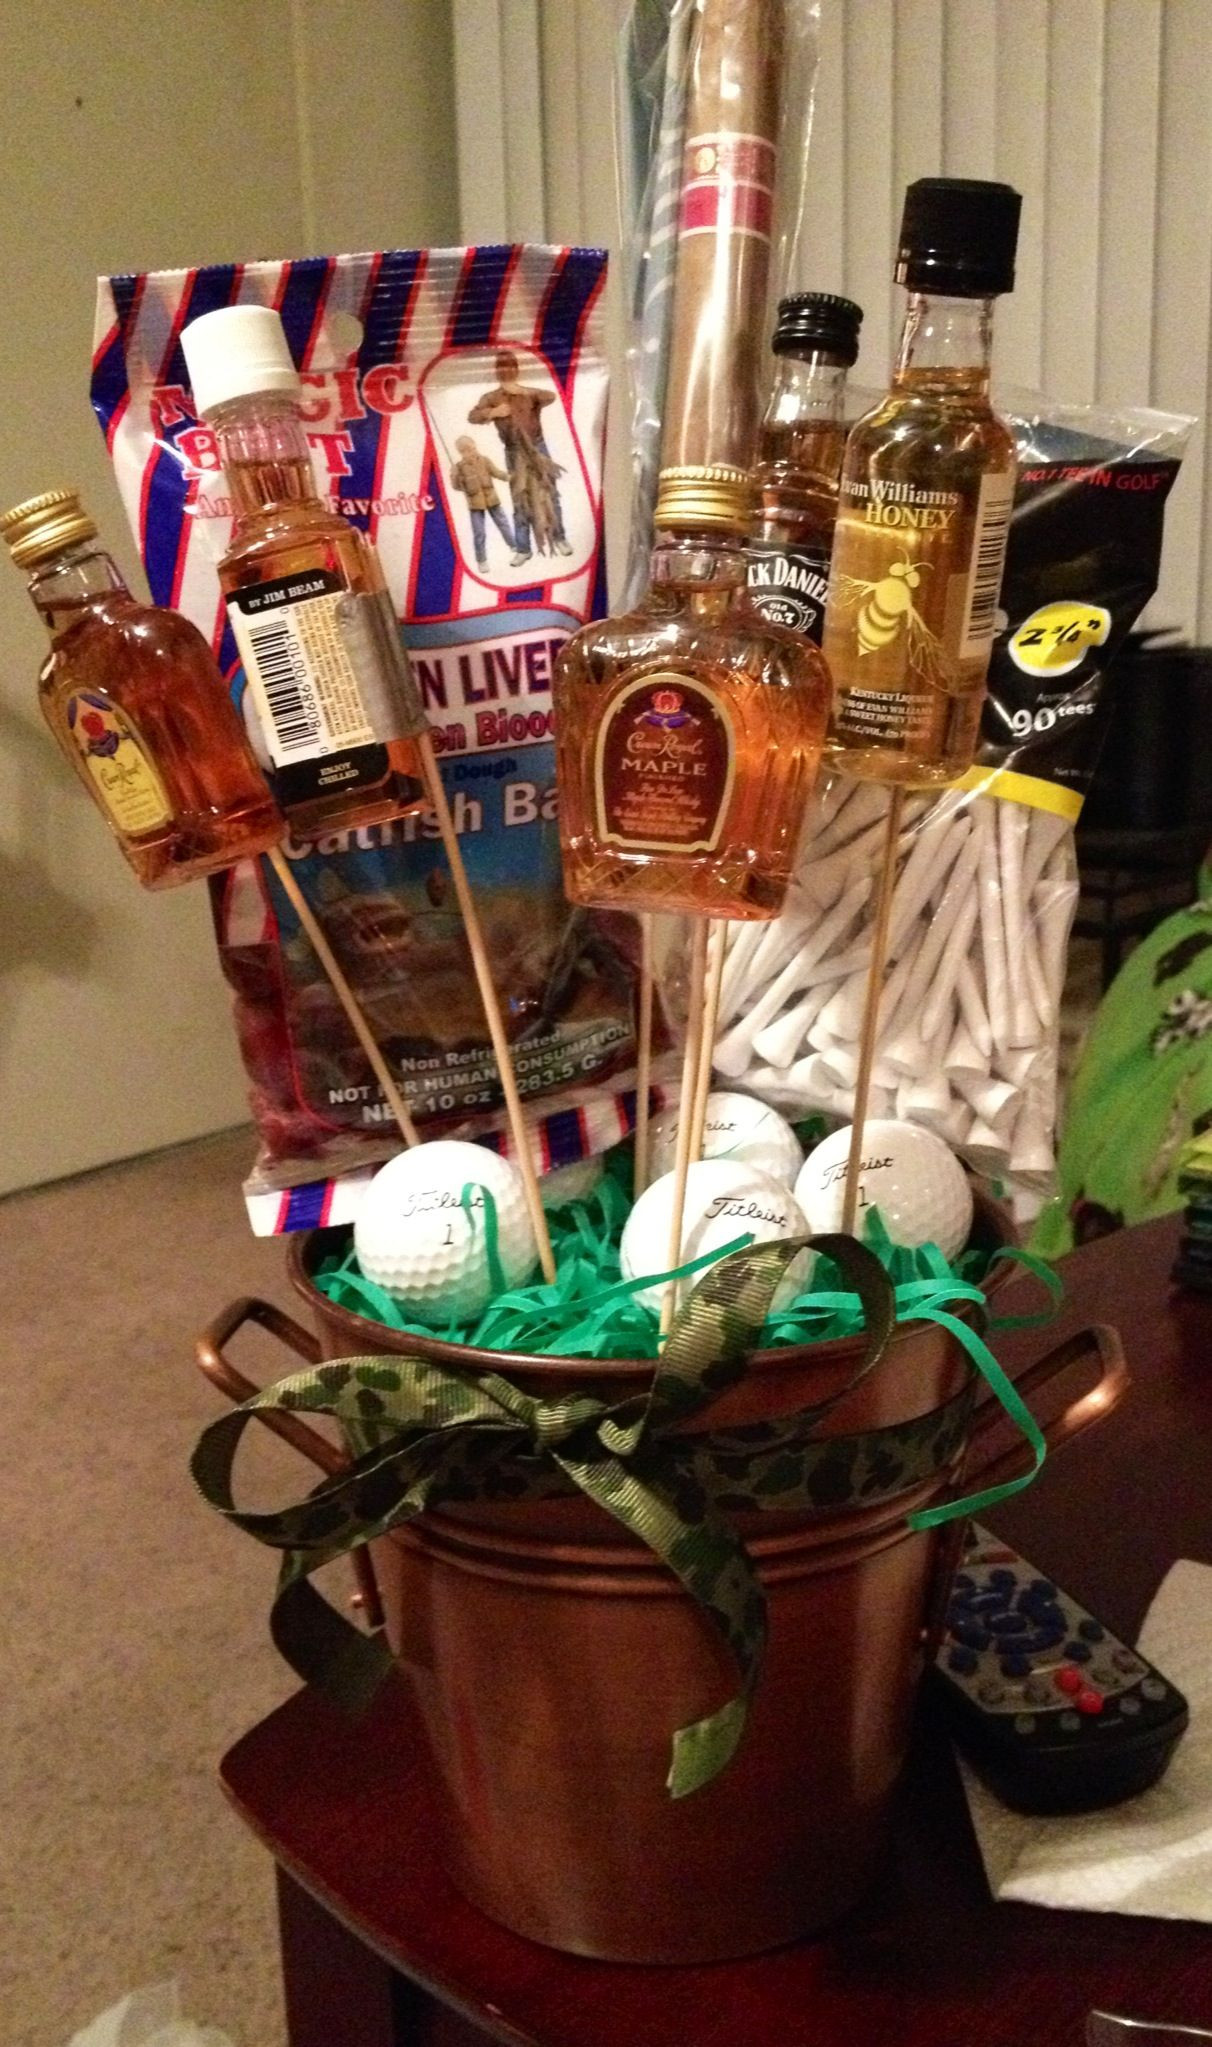 Manly Gift Baskets Ideas
 Man bouquet Gift for guys and men Groom groomsmen t